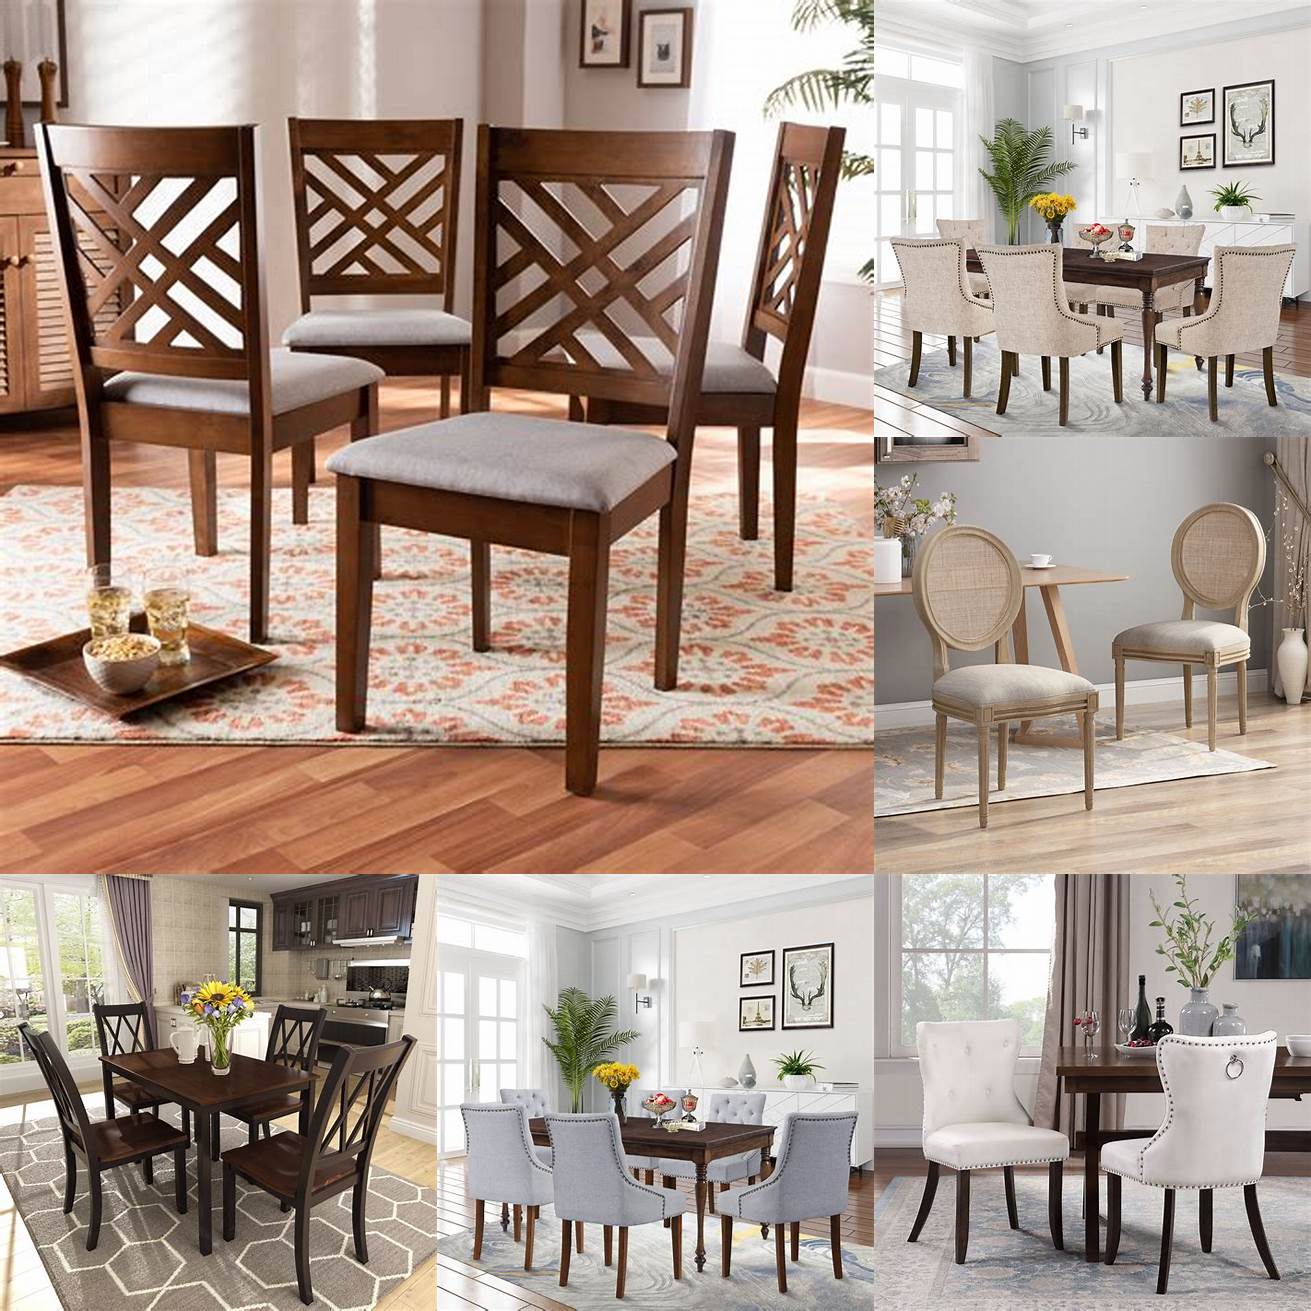 Wooden dining set with upholstered chairs